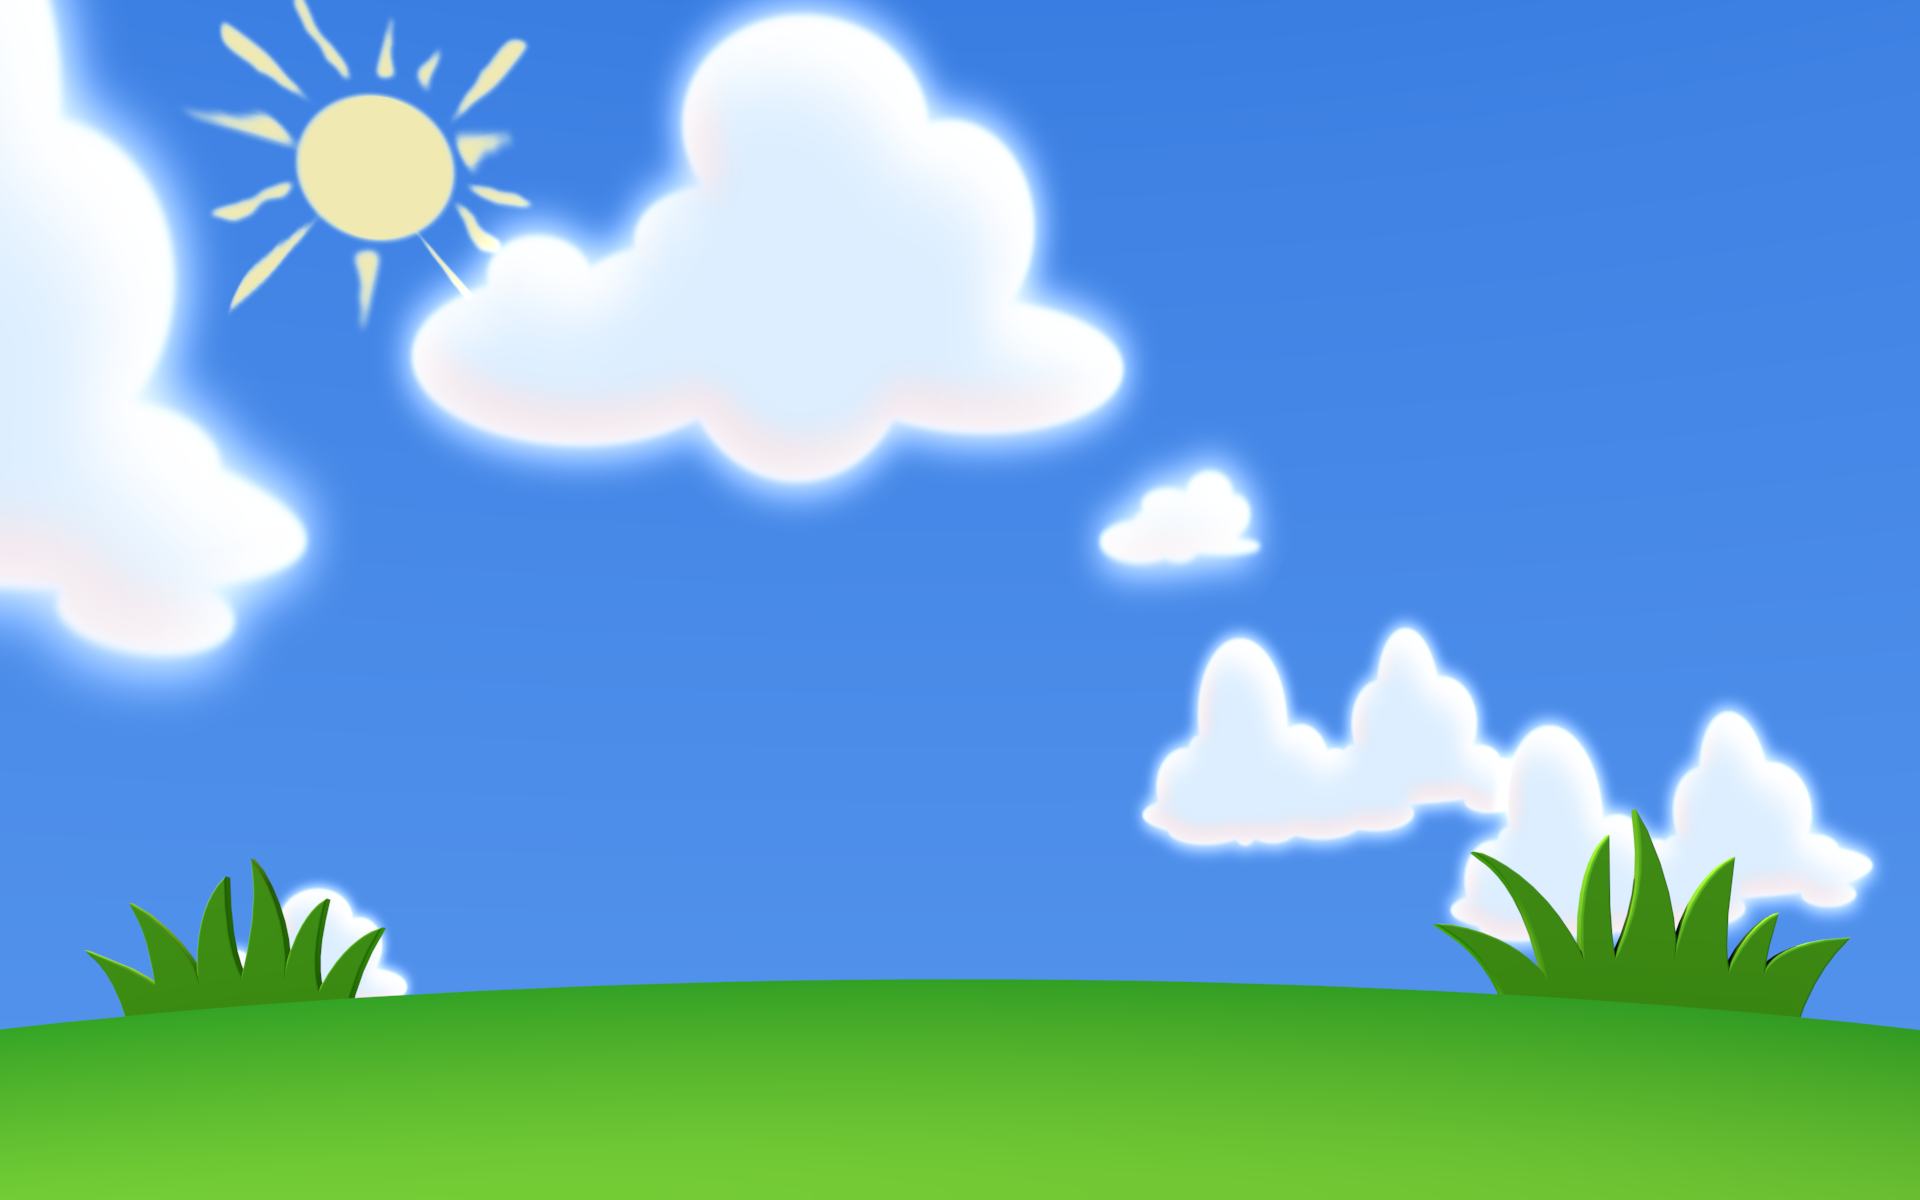 clipart background free download - photo #5